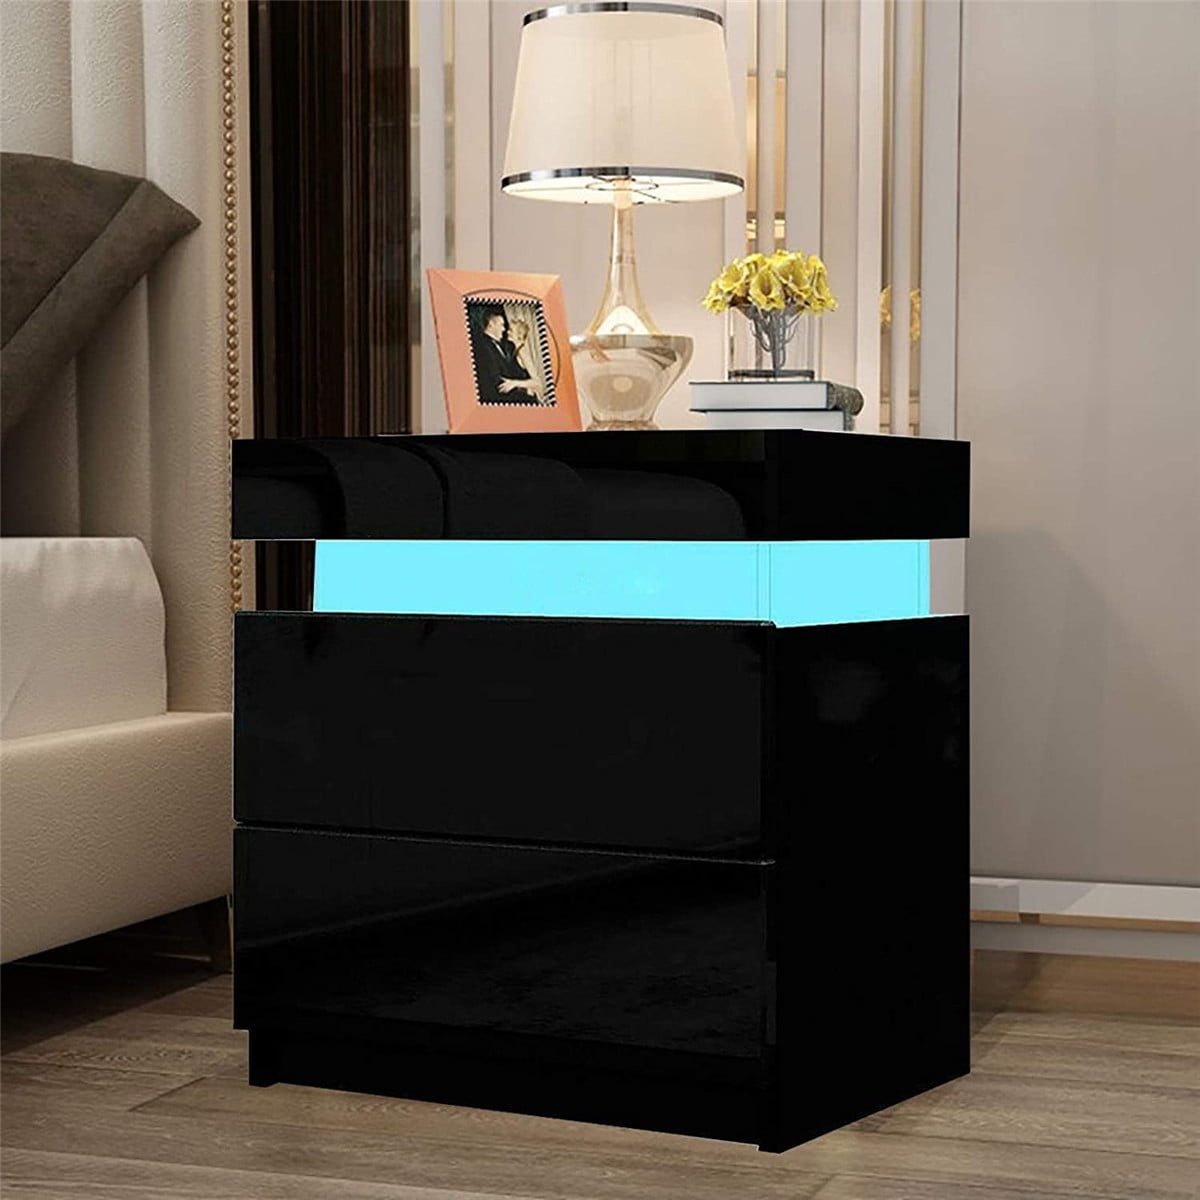 Details about   High Gloss Nightstand LED RGB Lighting 2 Drawer Modern Bedside End Table Bedroom 